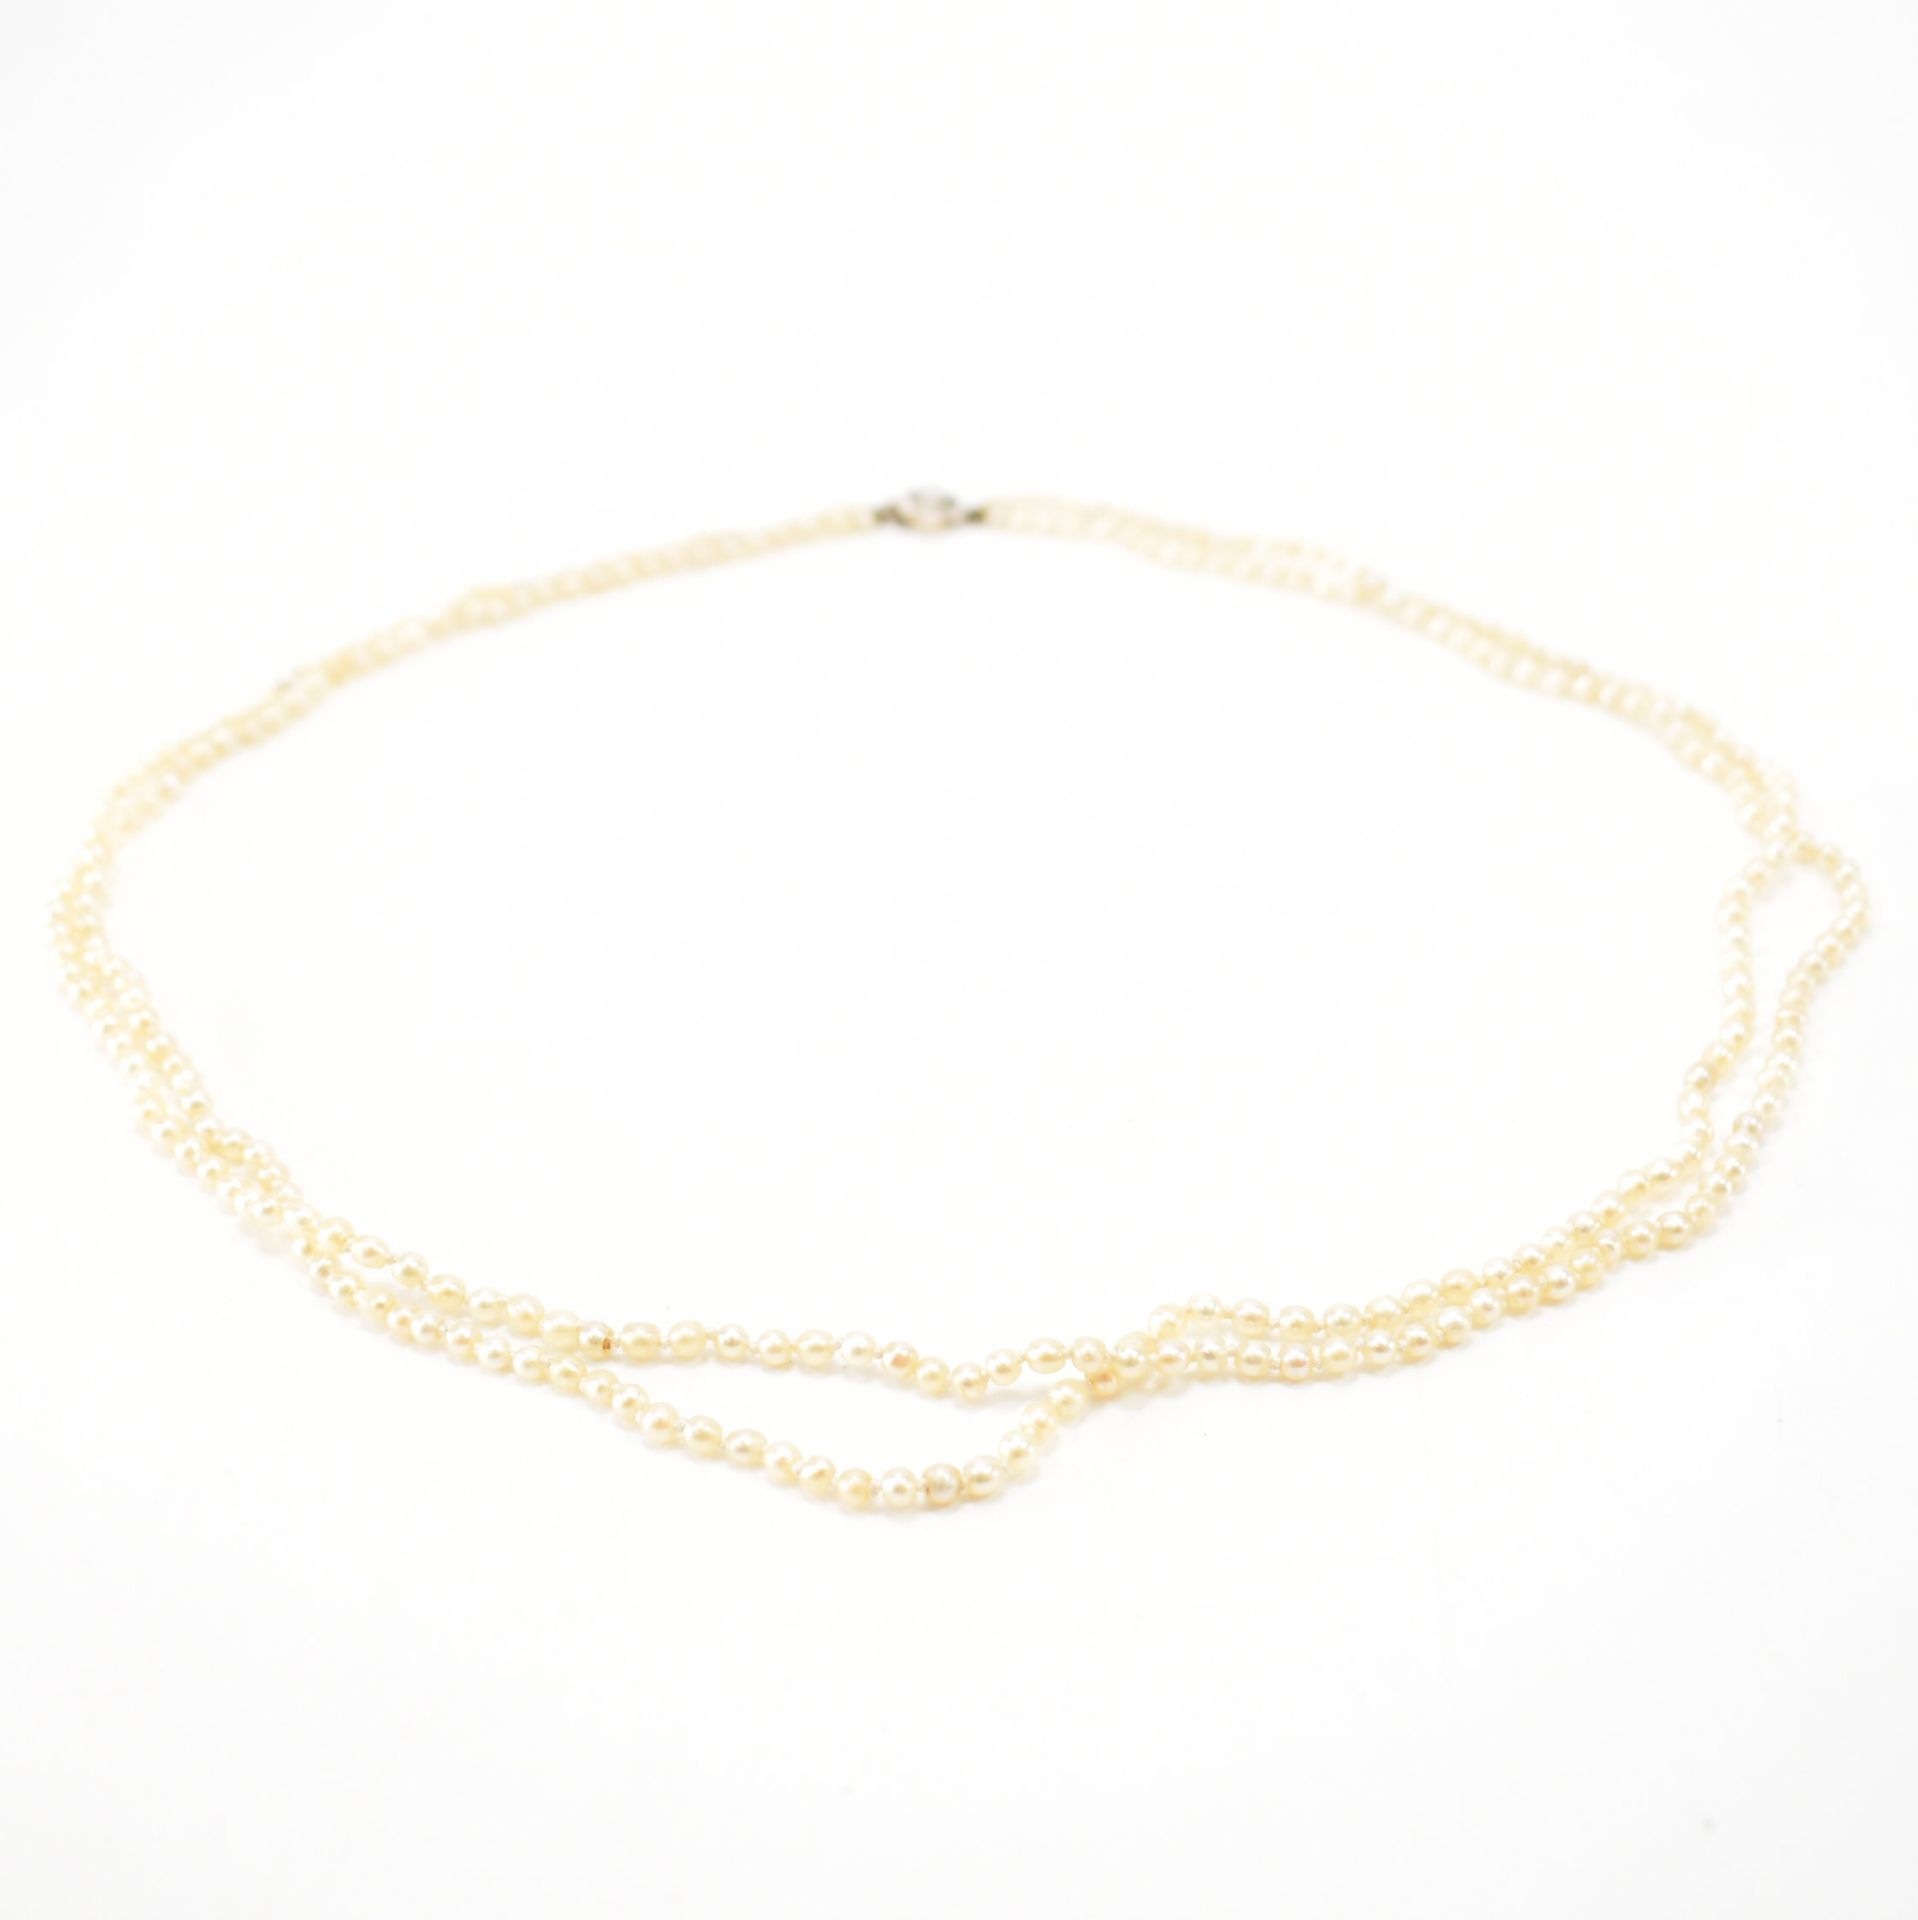 ANTIQUE PEARL & DIAMOND NECKLACE - Image 2 of 4